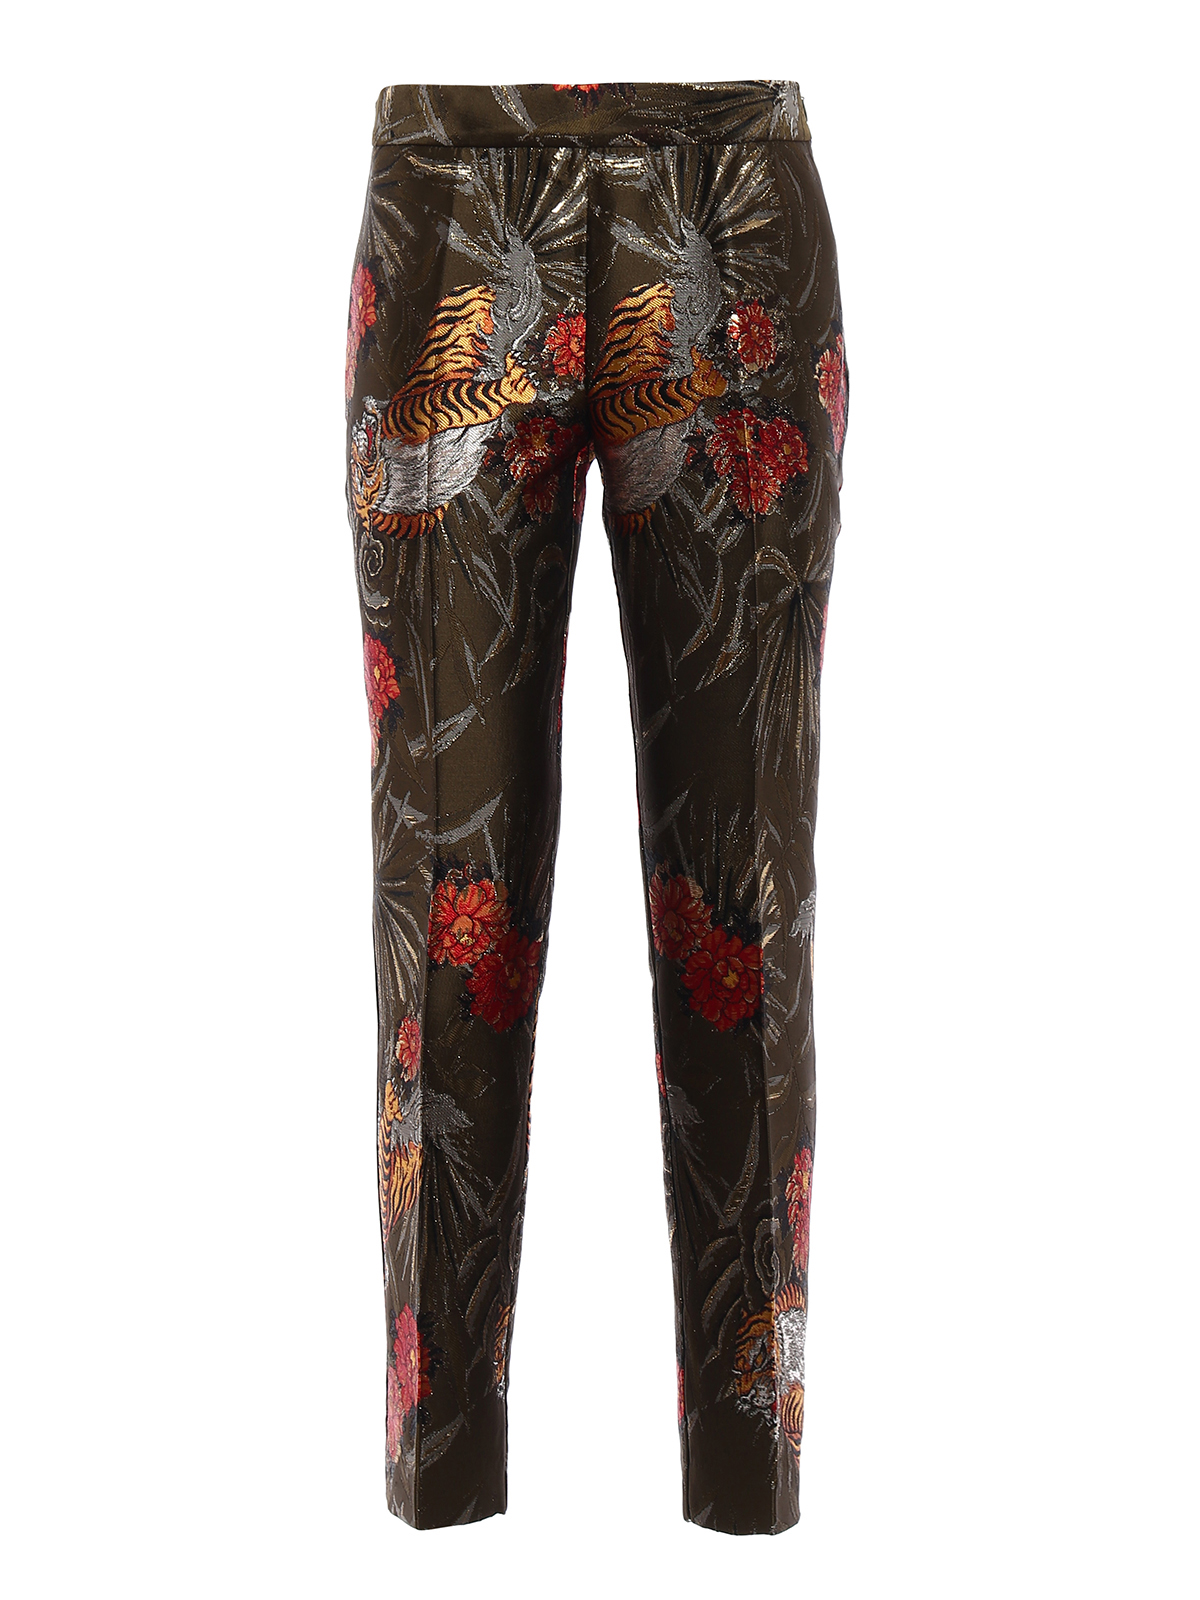 Womens Tailored Floral Jacquard Tapered Trouser  Boohoo UK